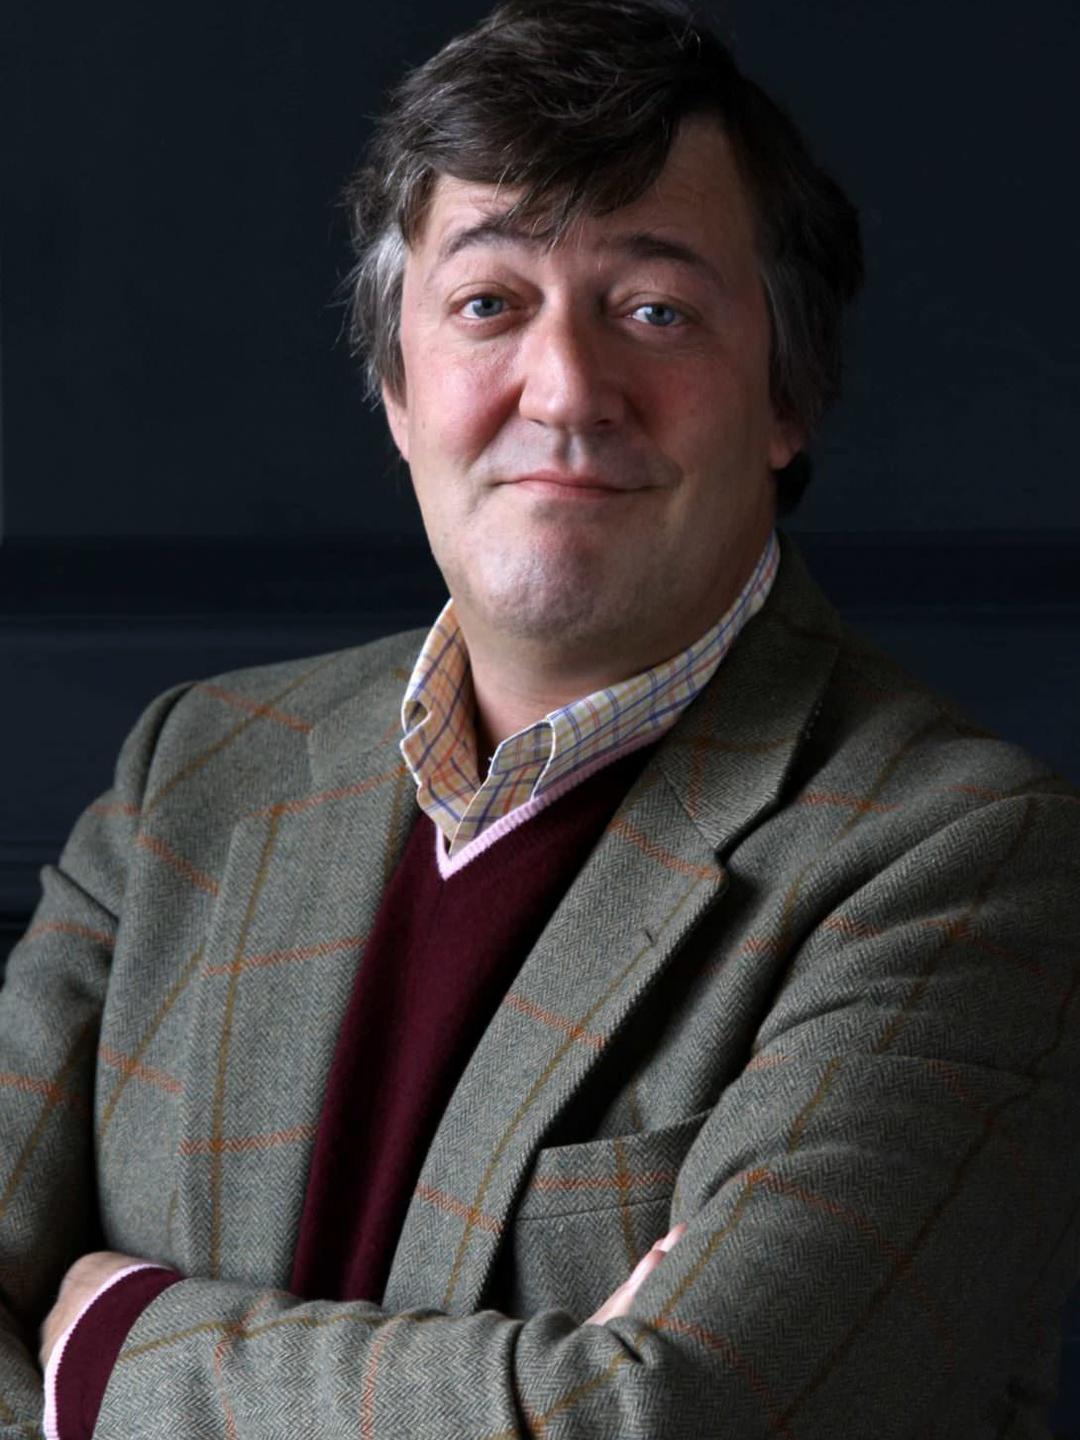 Stephen Fry does he have a wife